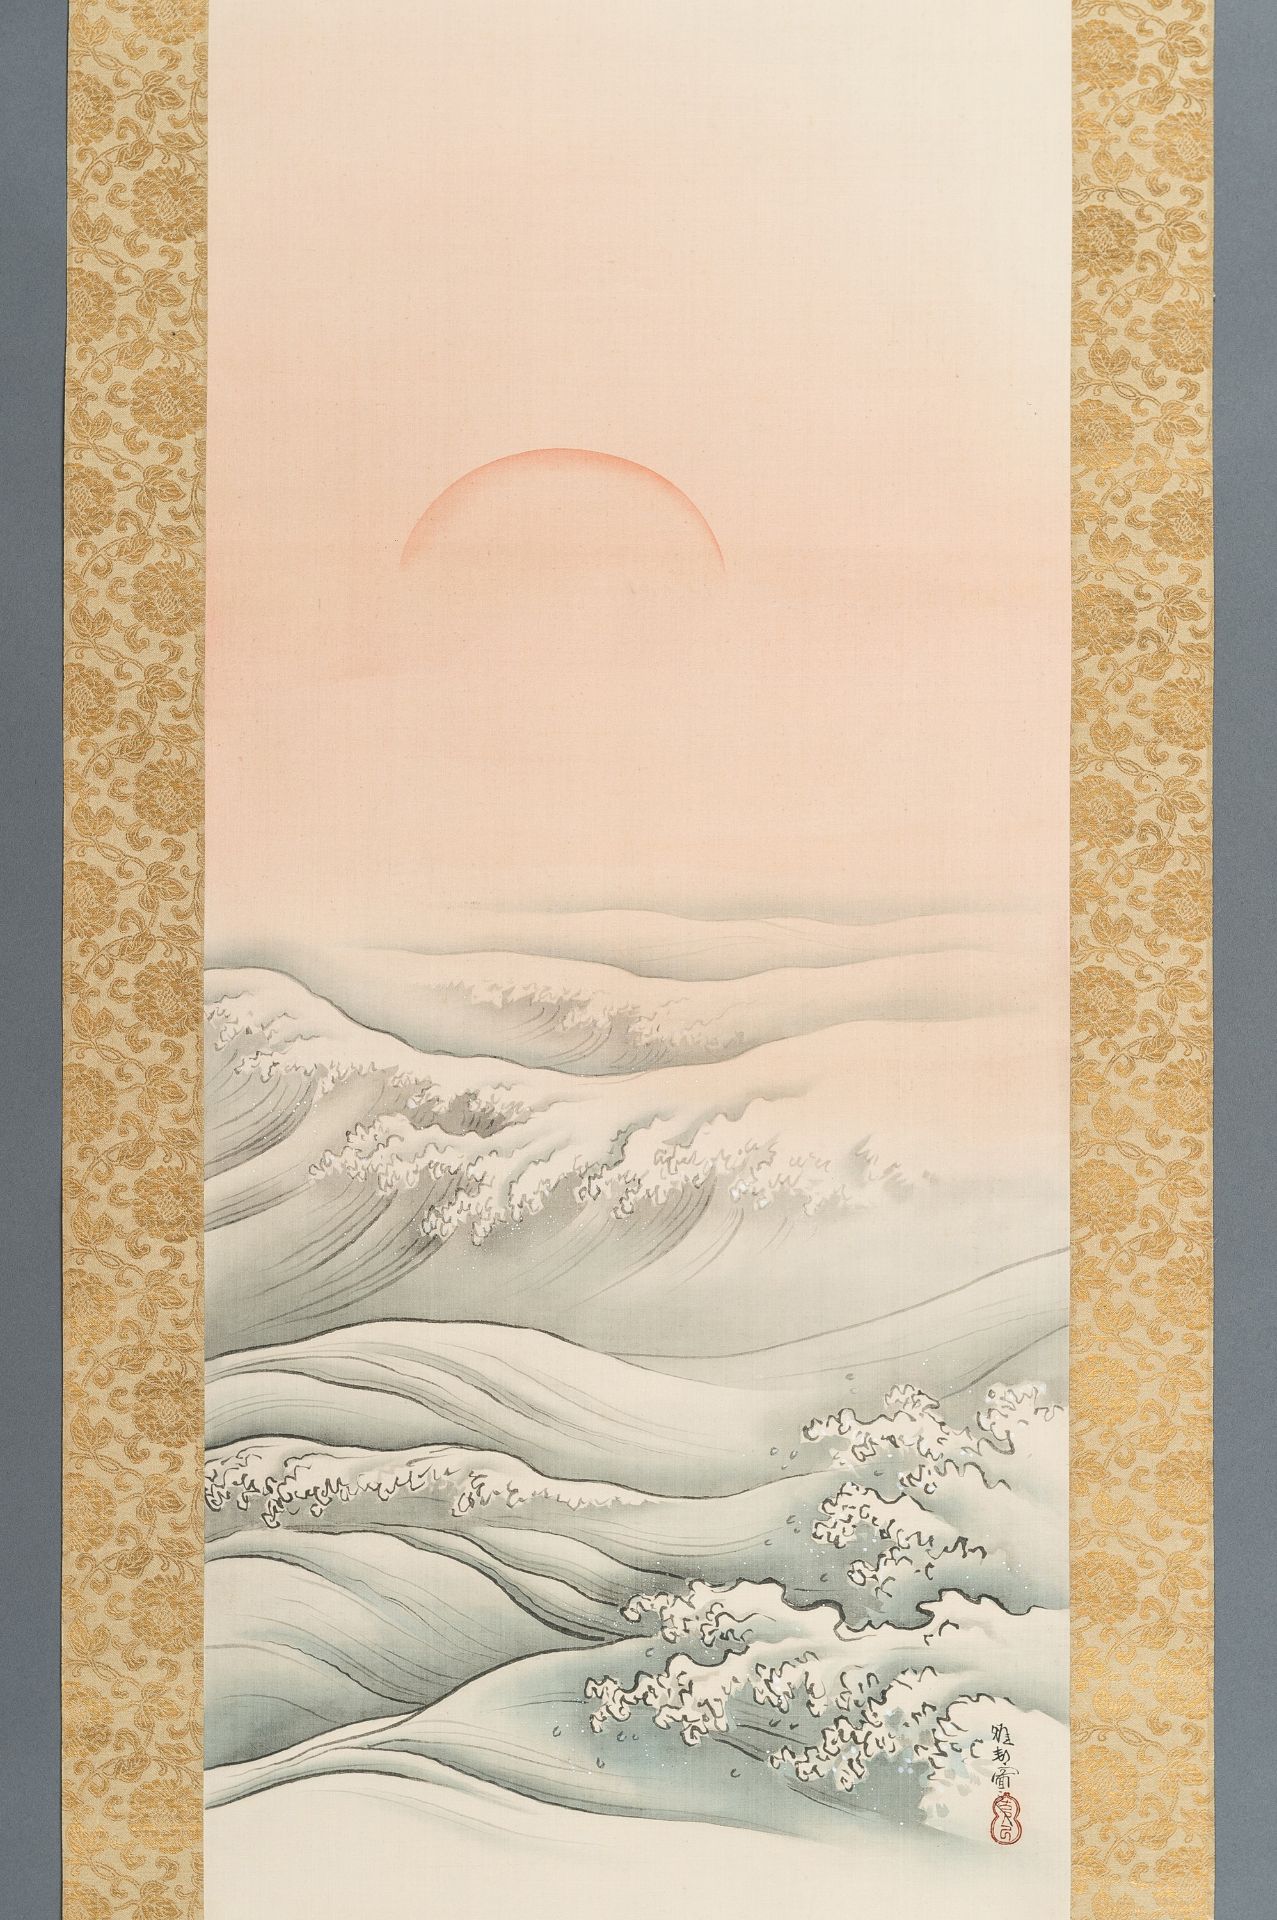 HASHIMOTO GAHO (1835-1908): RISING SUN OVER THE OCEAN - Image 8 of 14